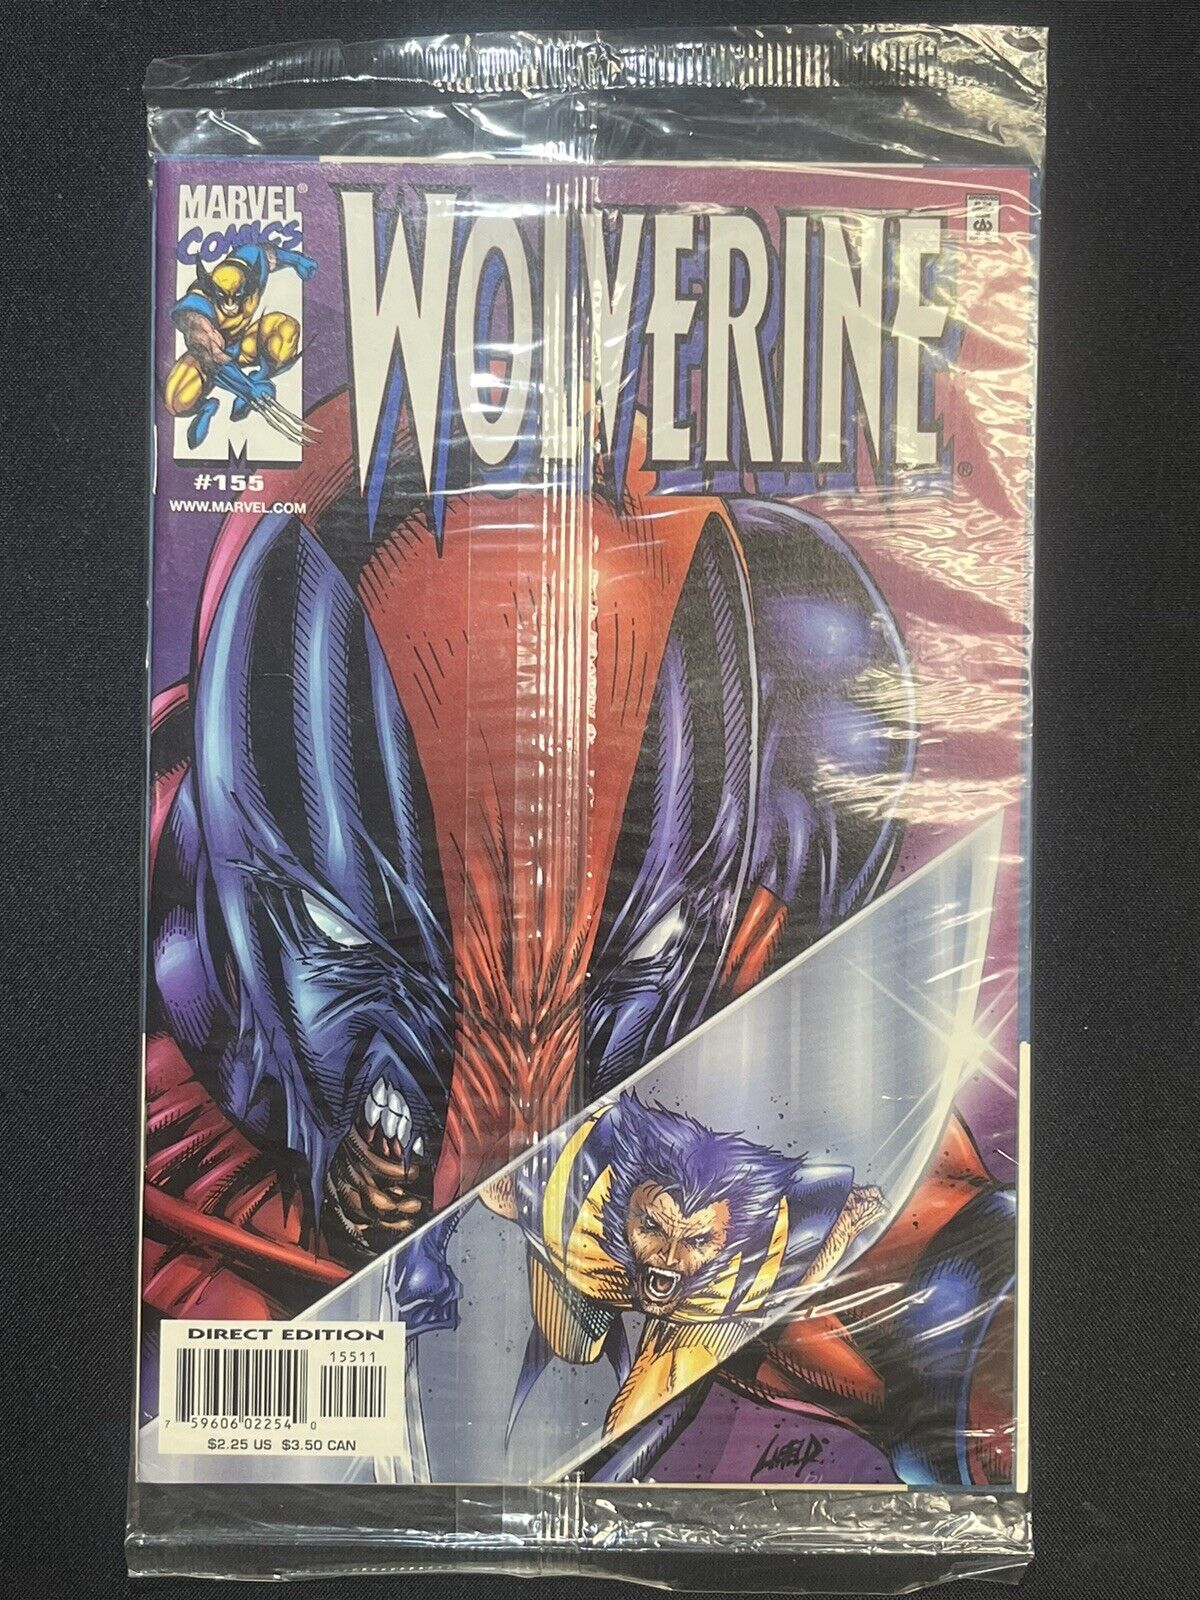 Wolverine #155 Rare “Marvel Direct Marketing Package” NM+ Deadpool Homage Cover